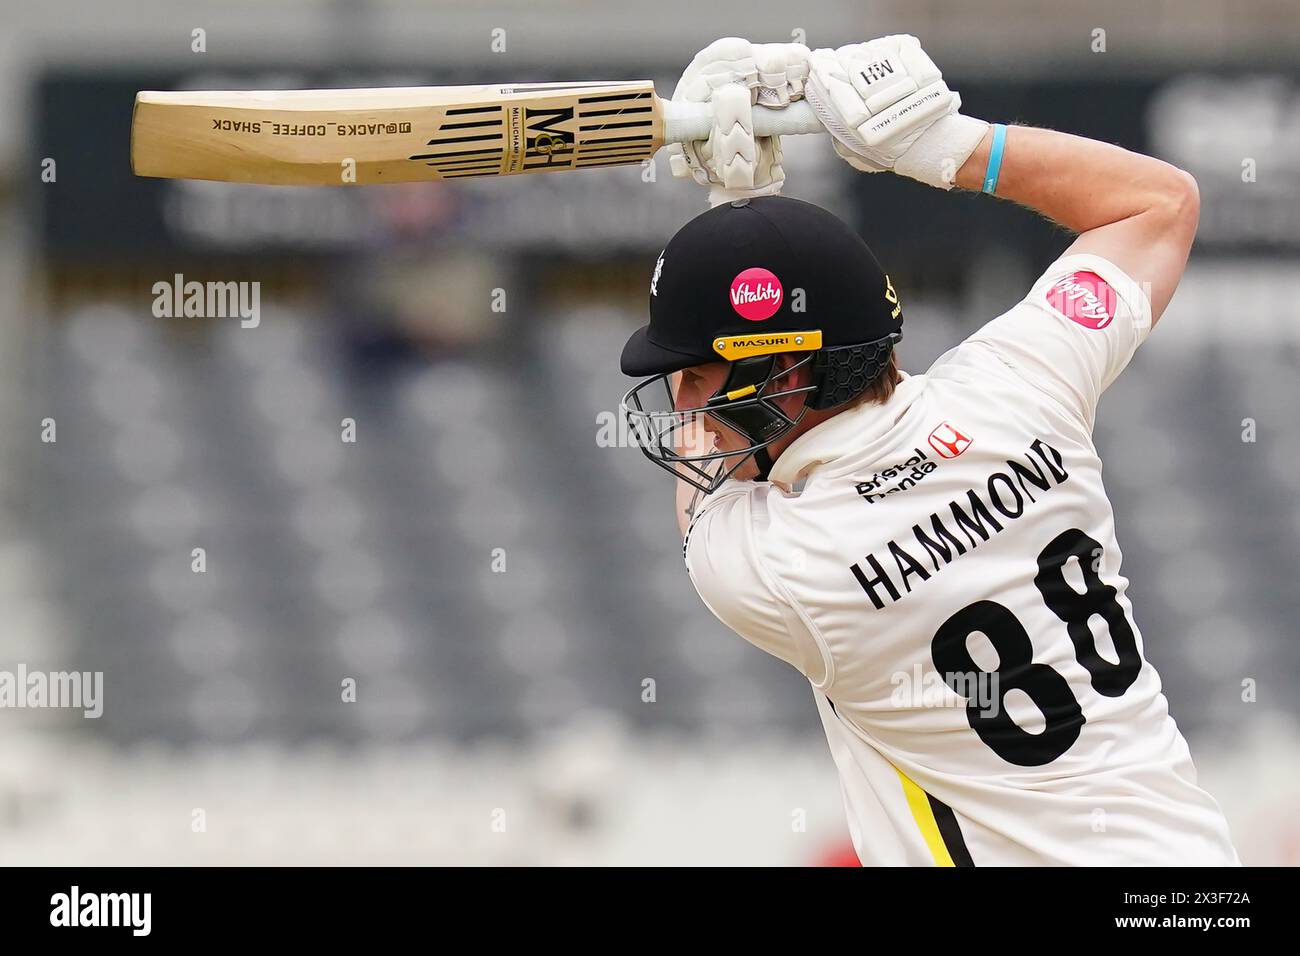 Bristol, UK, 26 April 2024. Gloucestershire's Miles Hammond batting during the Vitality County Championship Division Two match between Gloucestershire and Middlesex. Credit: Robbie Stephenson/Gloucestershire Cricket/Alamy Live News Stock Photo